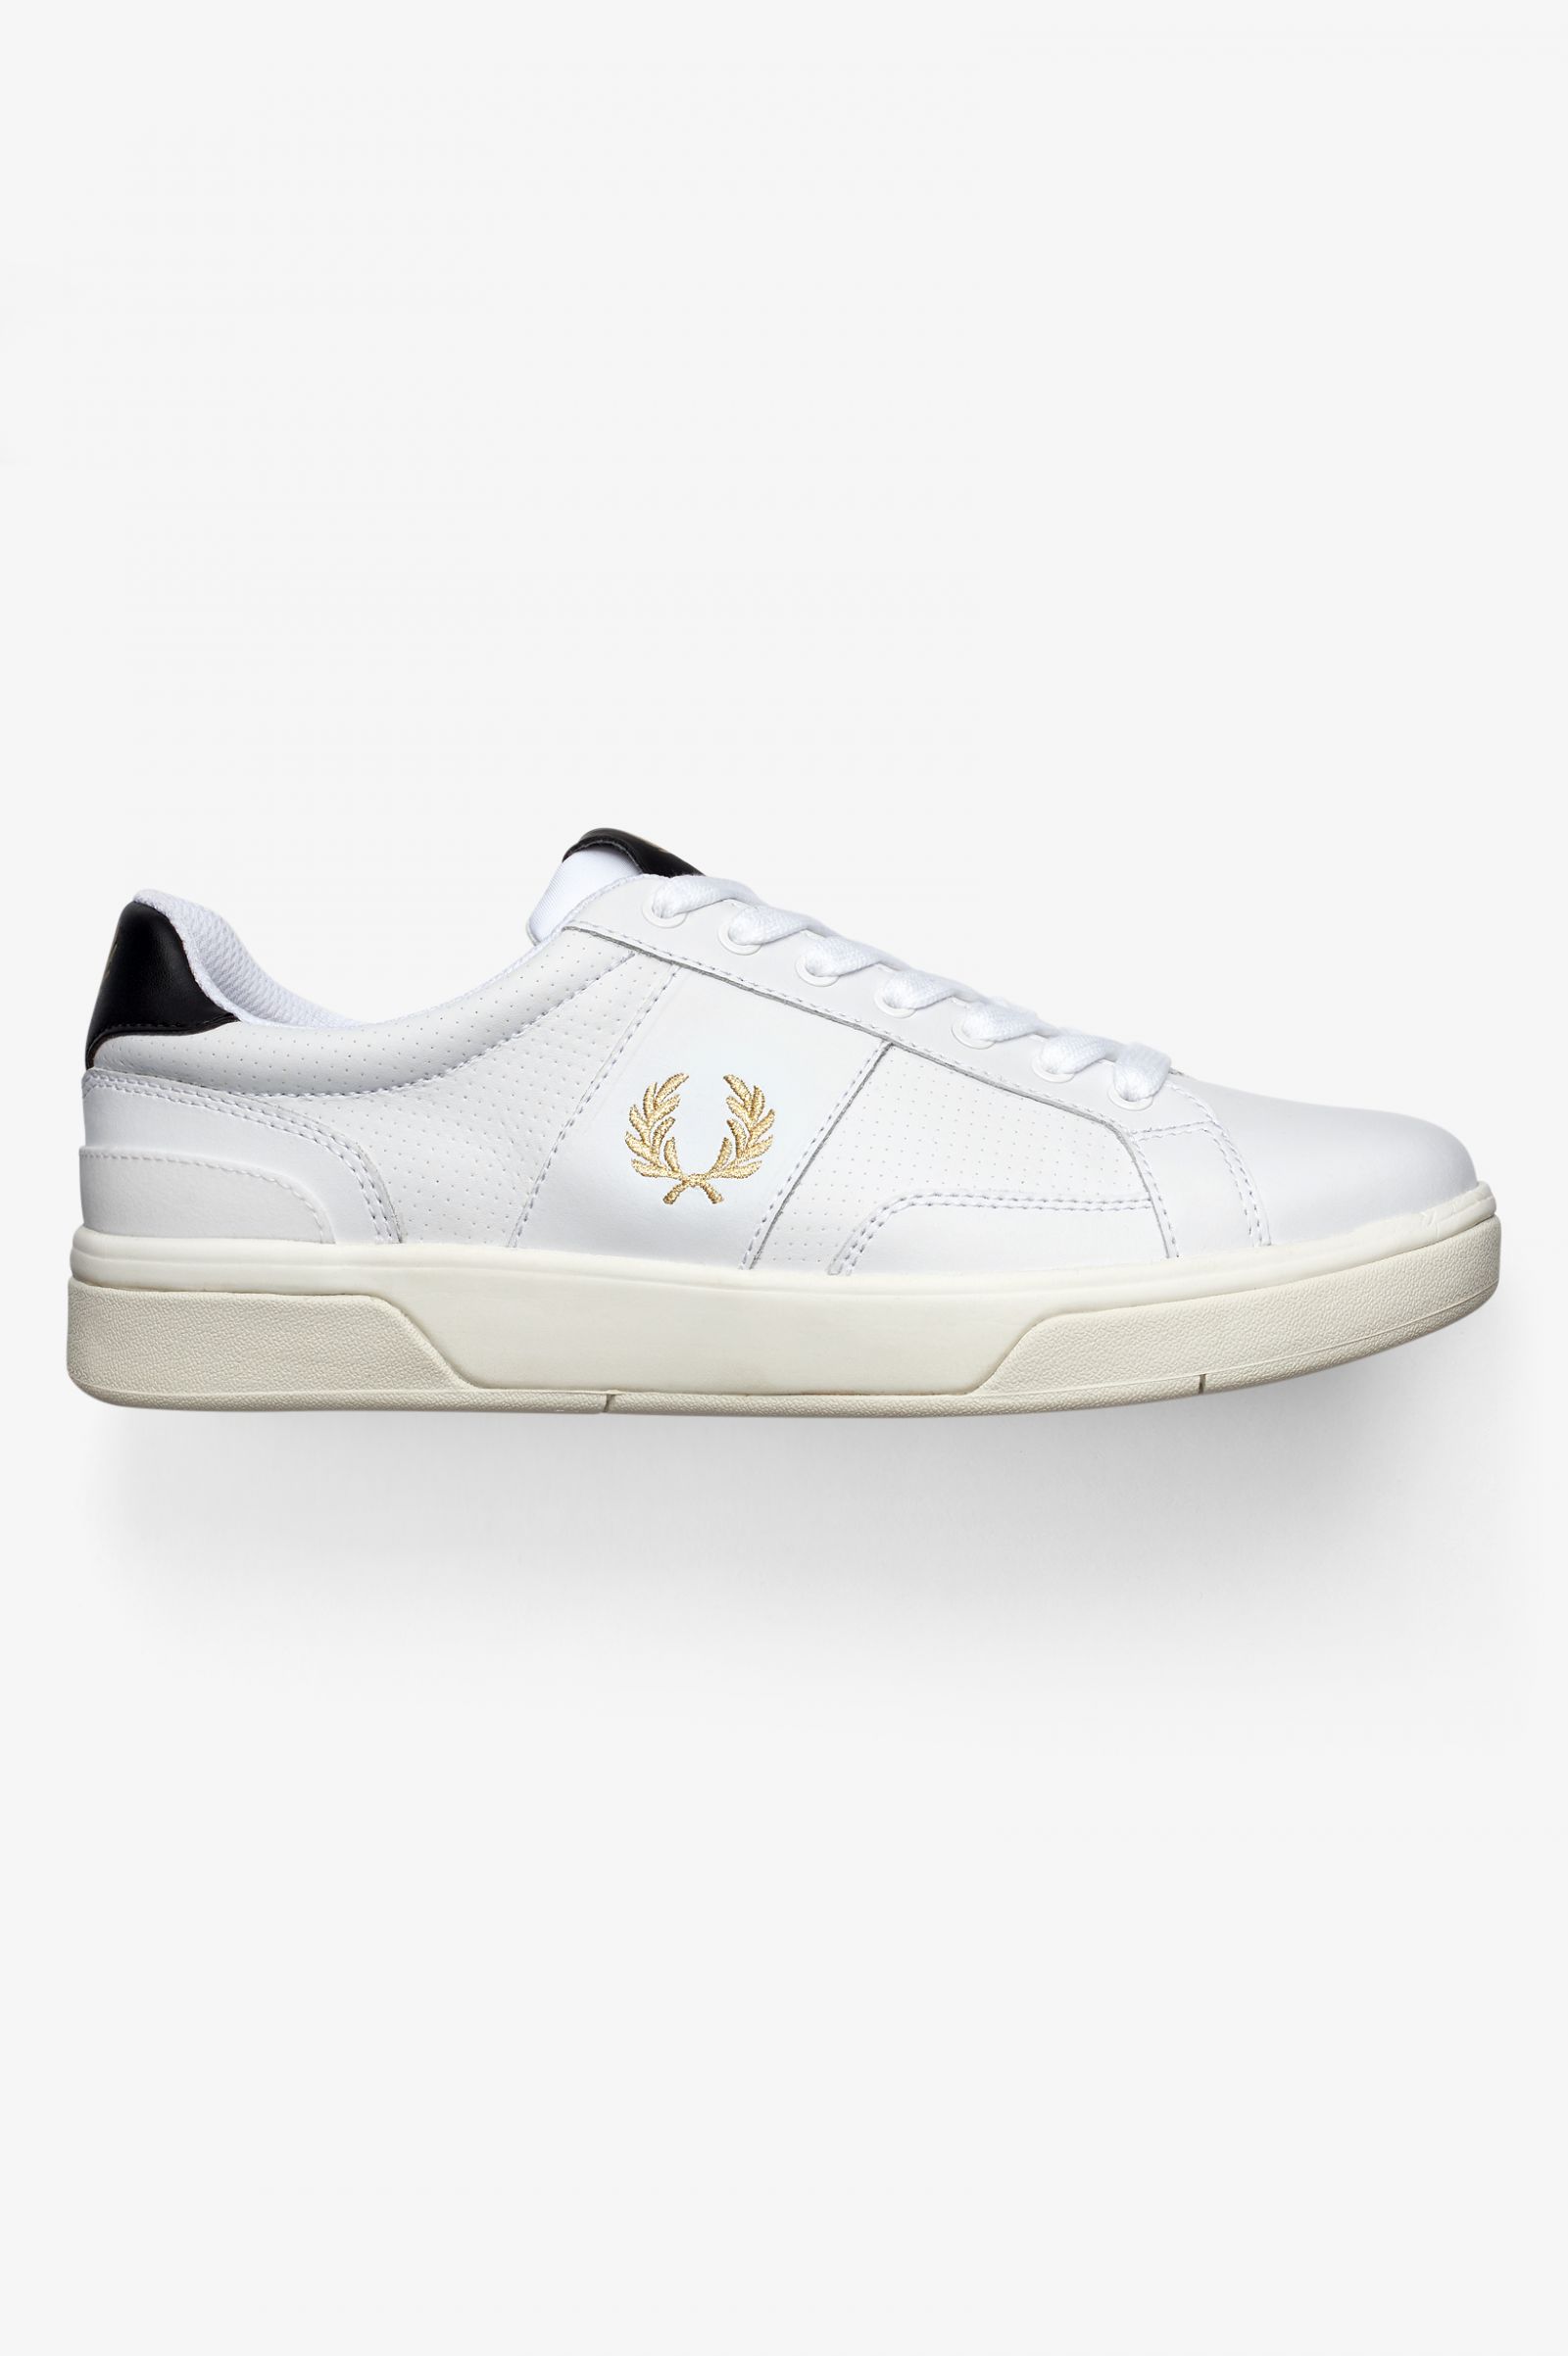 Fred Perry UK